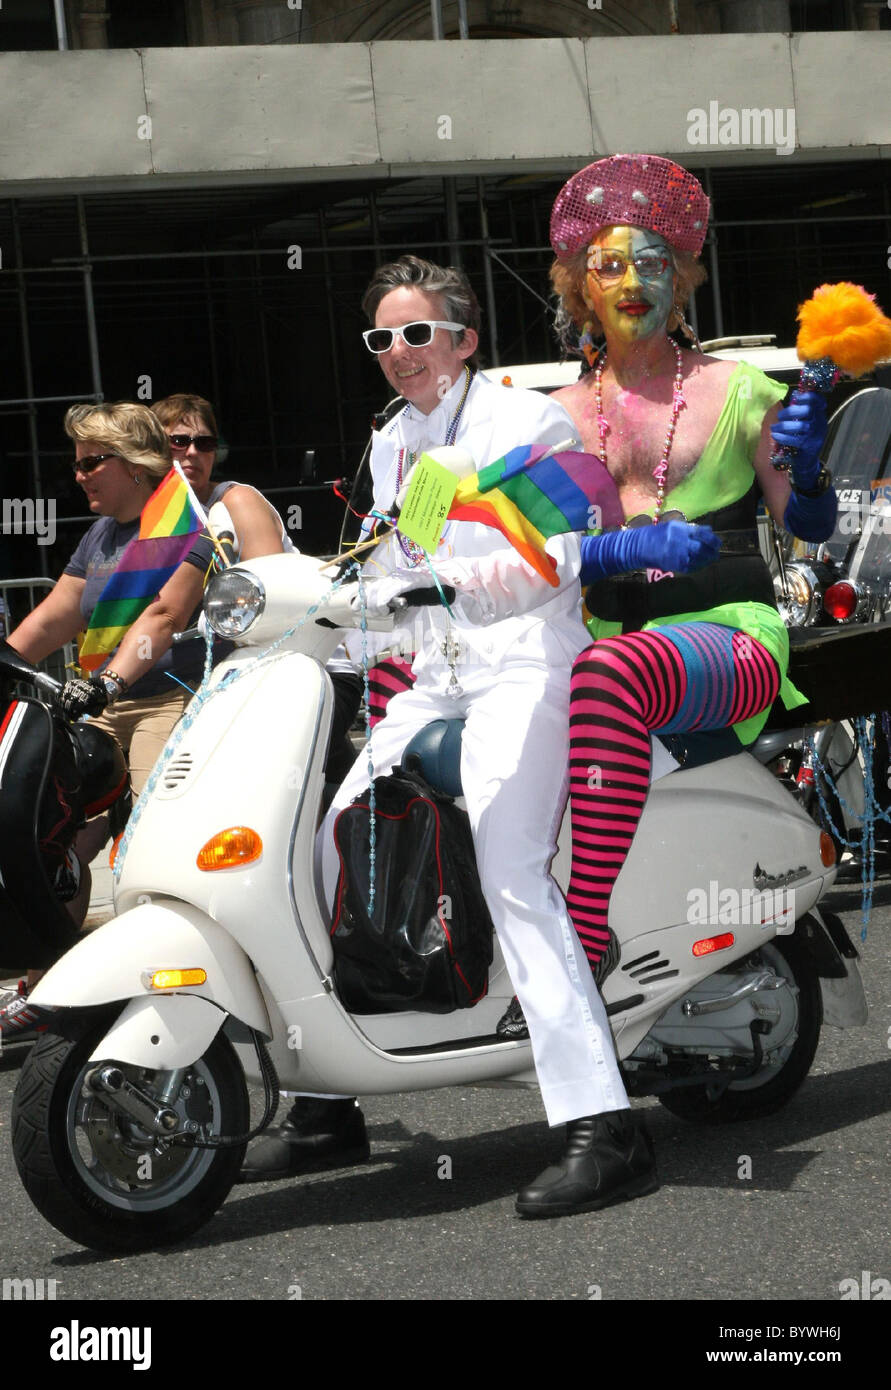 atmosphere-38th-annual-lgbt-gay-pride-march-united-for-equality-in-BYWH6J.jpg